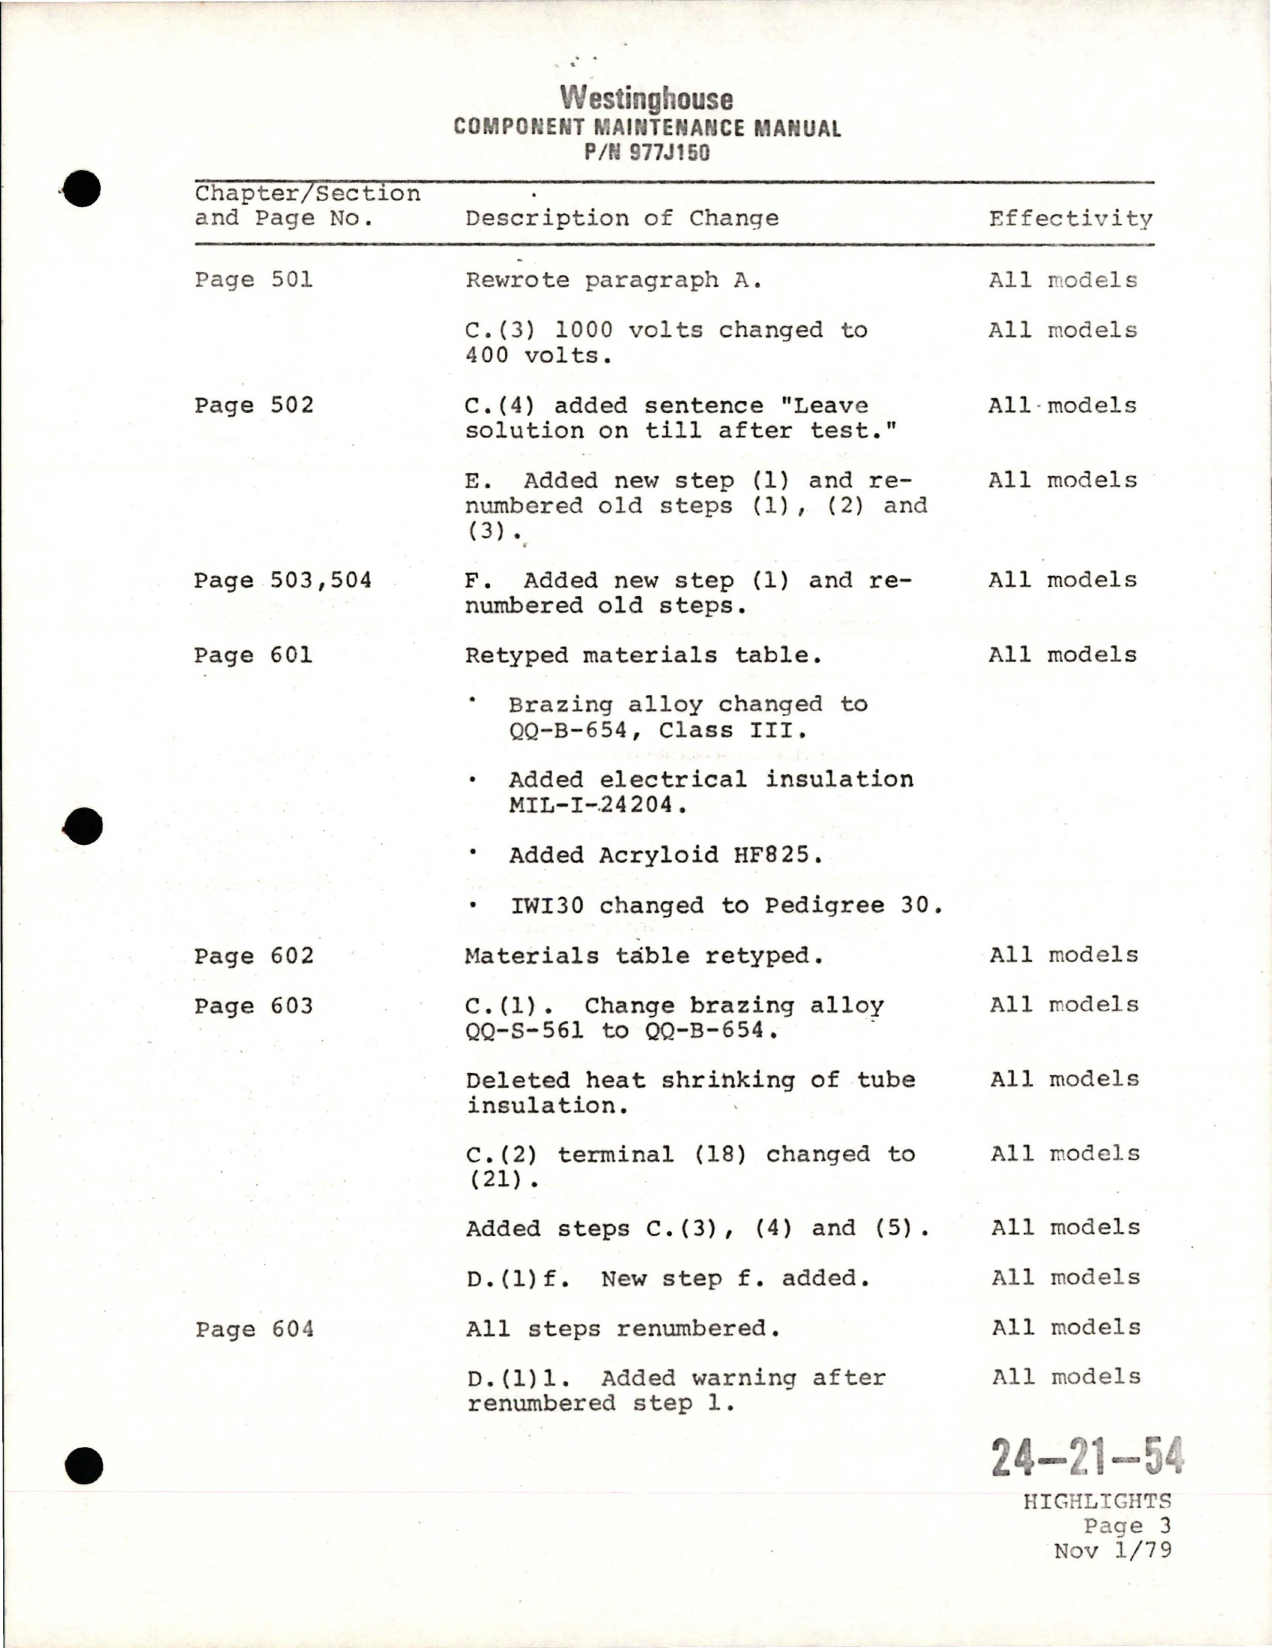 Sample page 5 from AirCorps Library document: Maintenance Manual with Illustrated Parts List for AC Generator - Parts 977J150-1, 977J150-2, 977J150-3, and 977J150-4 